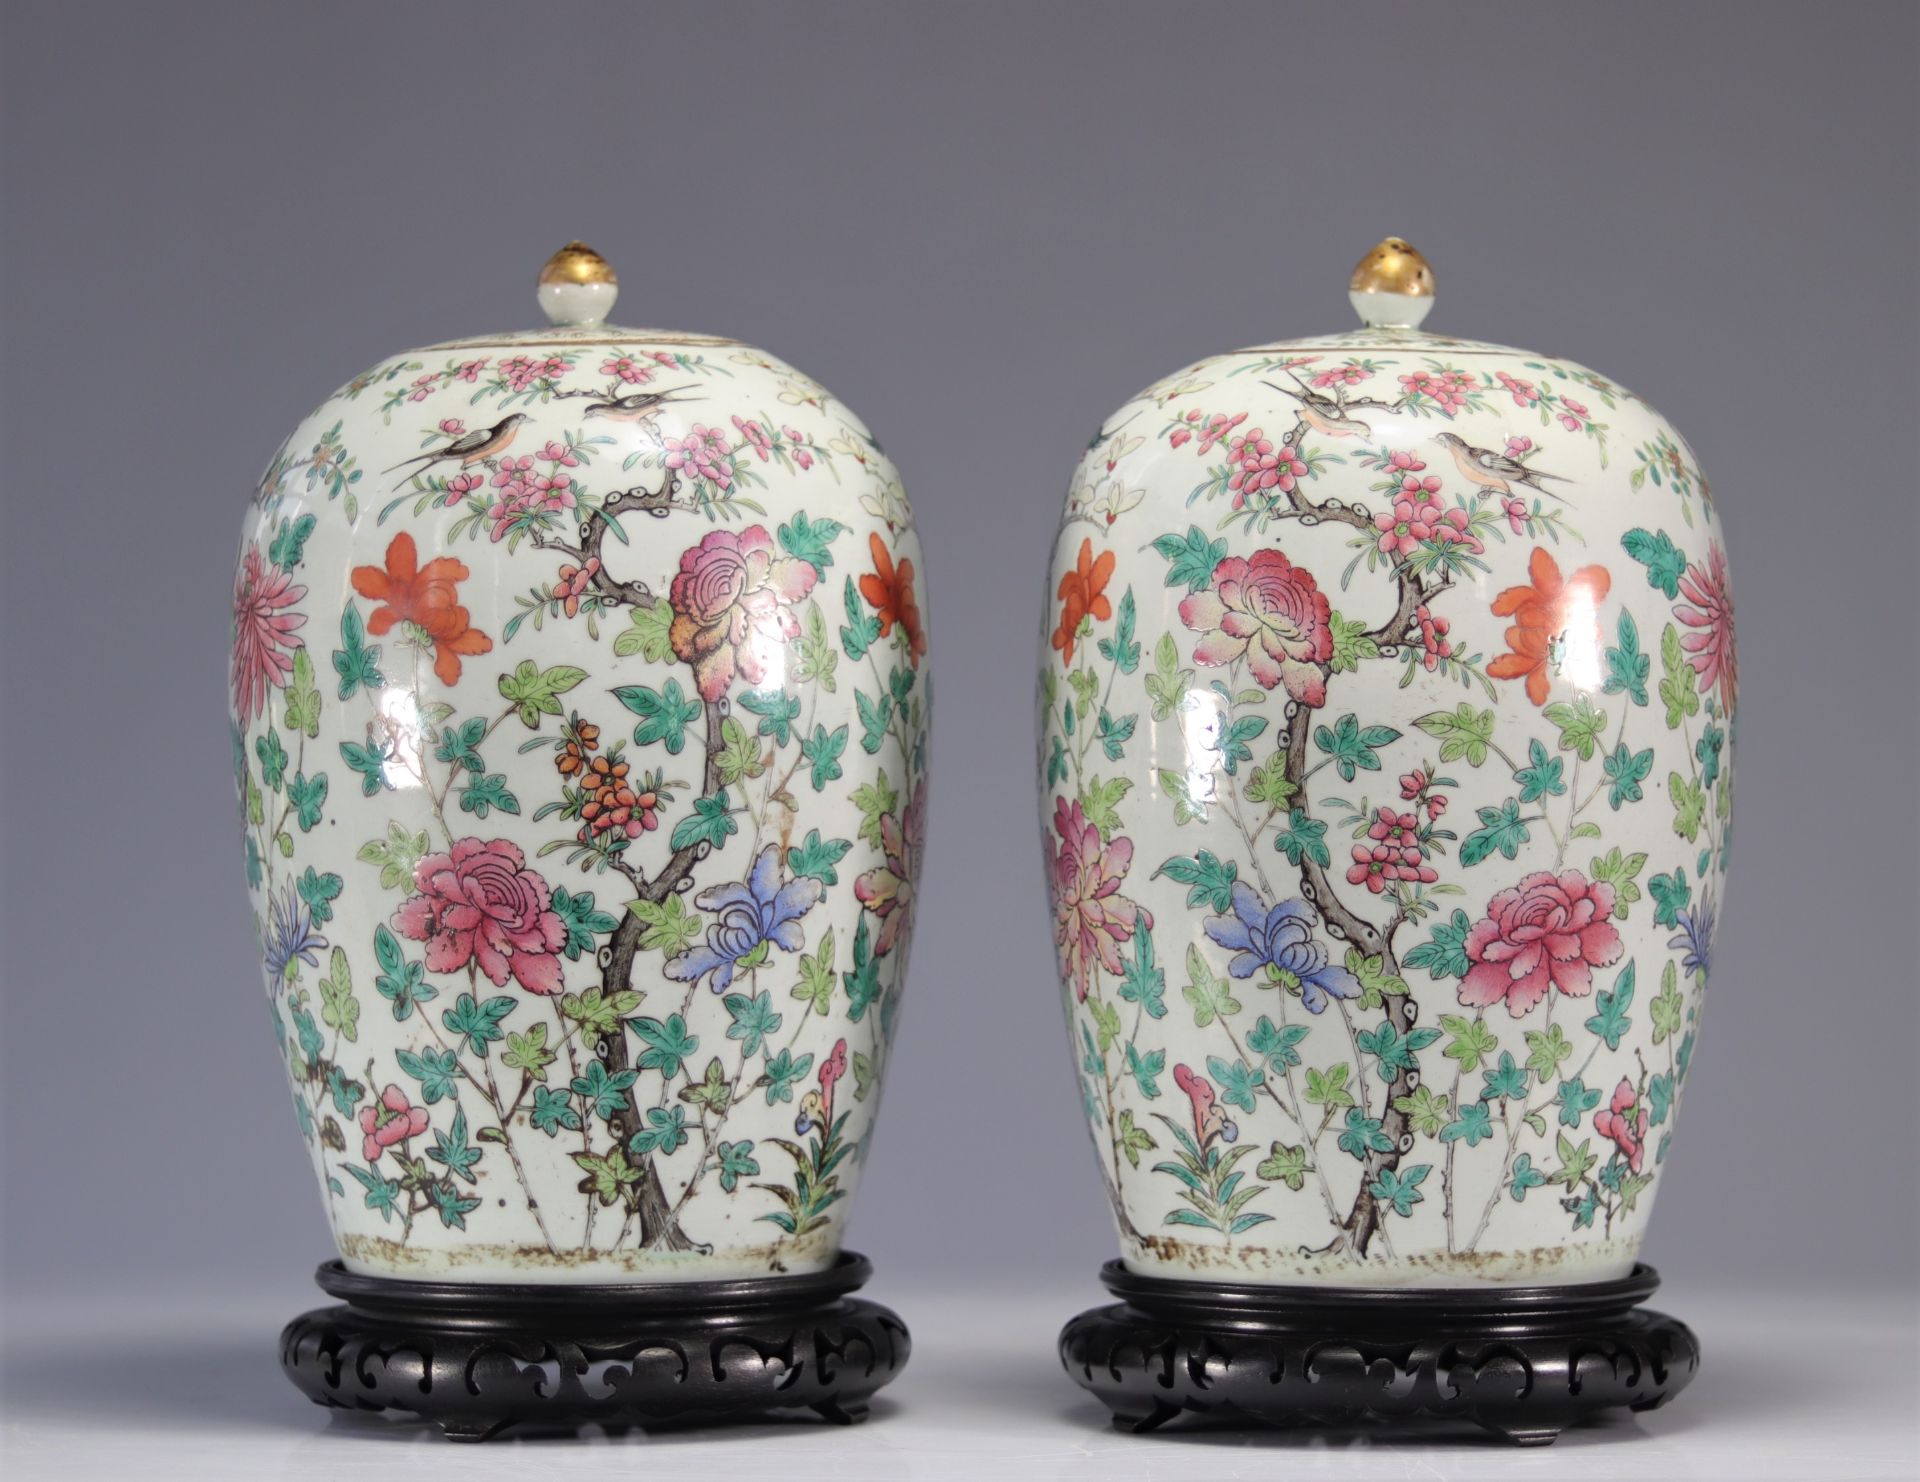 Pair of covered vases in famille rose porcelain with floral and bird decoration - Image 3 of 5